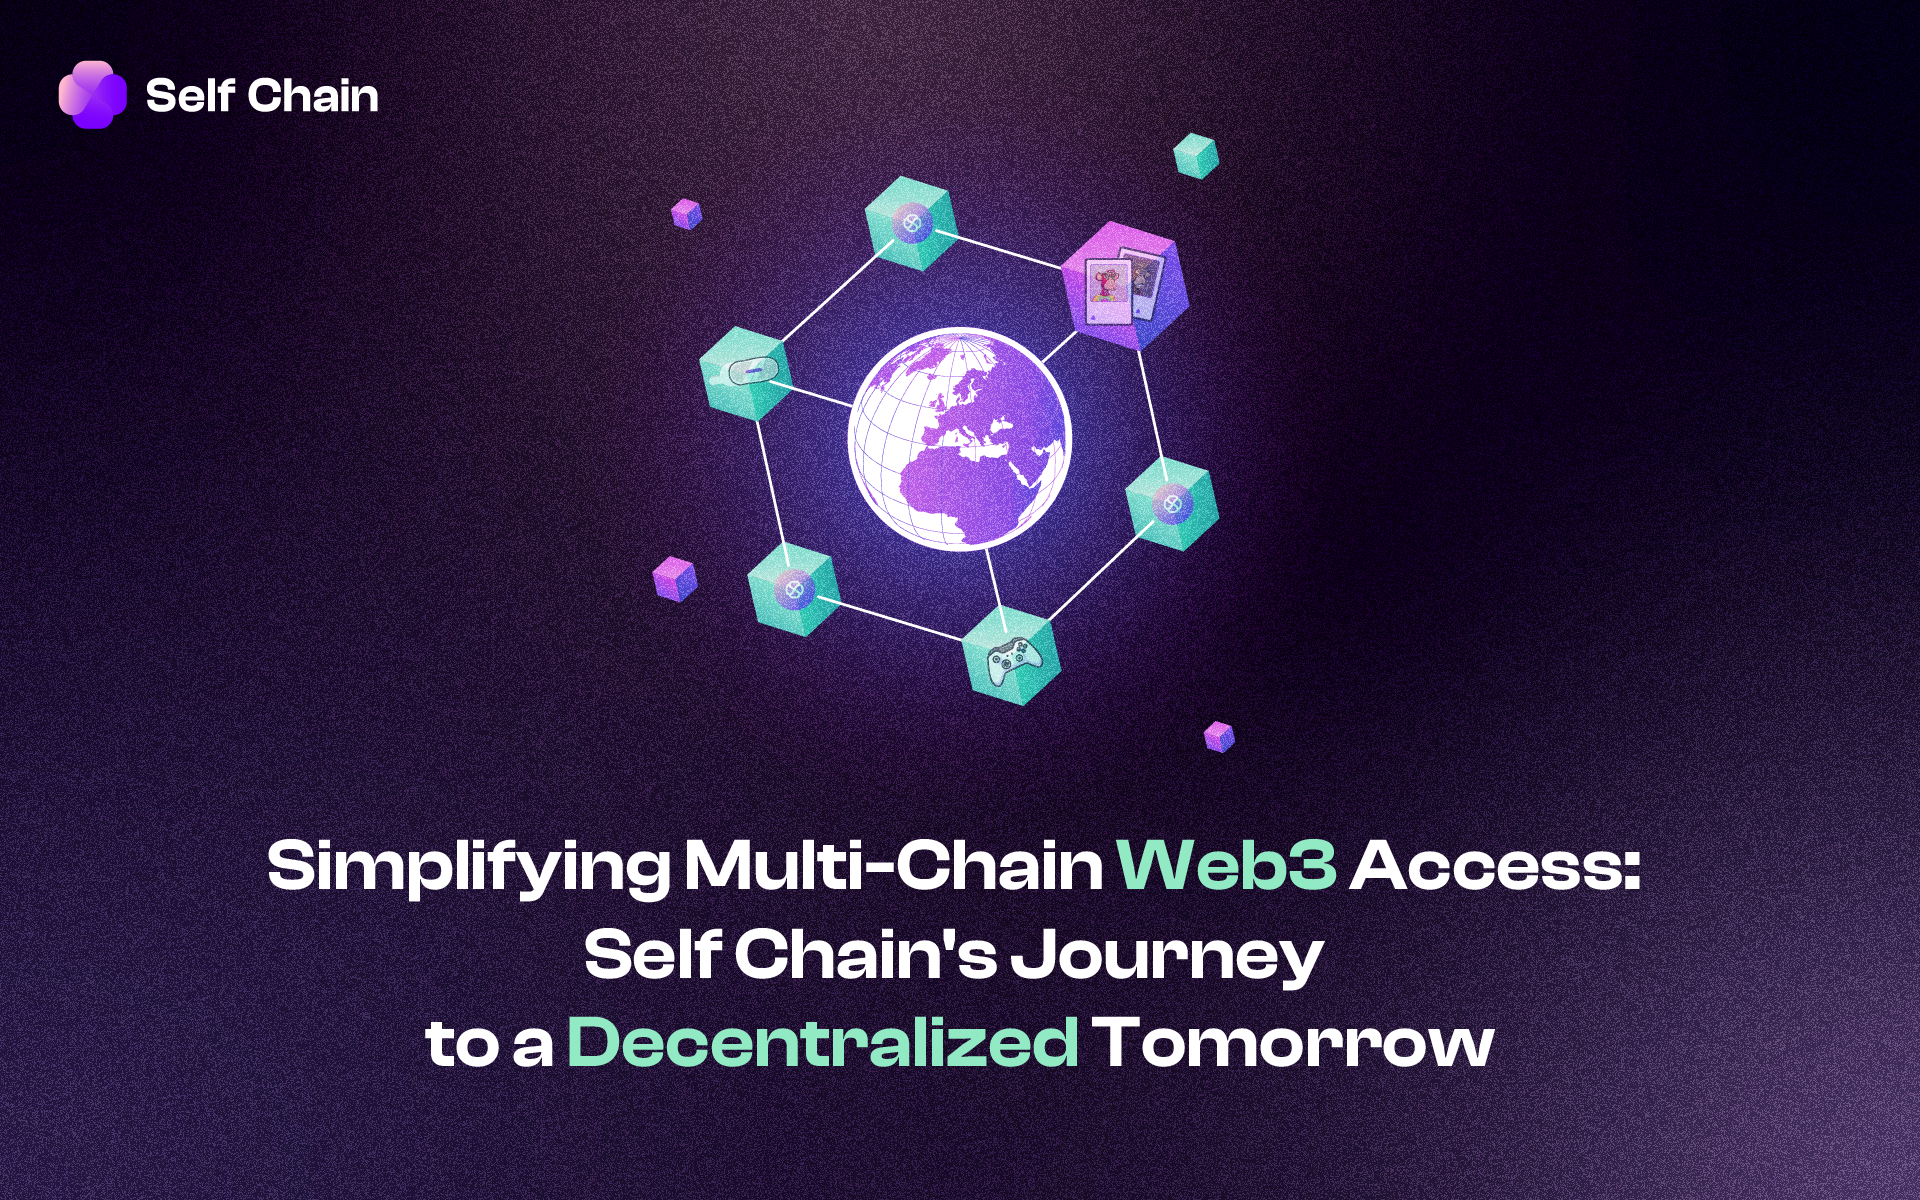 Simplifying Multi-Chain Web3 Access: Self Chain's Journey to a Decentralized Tomorrow